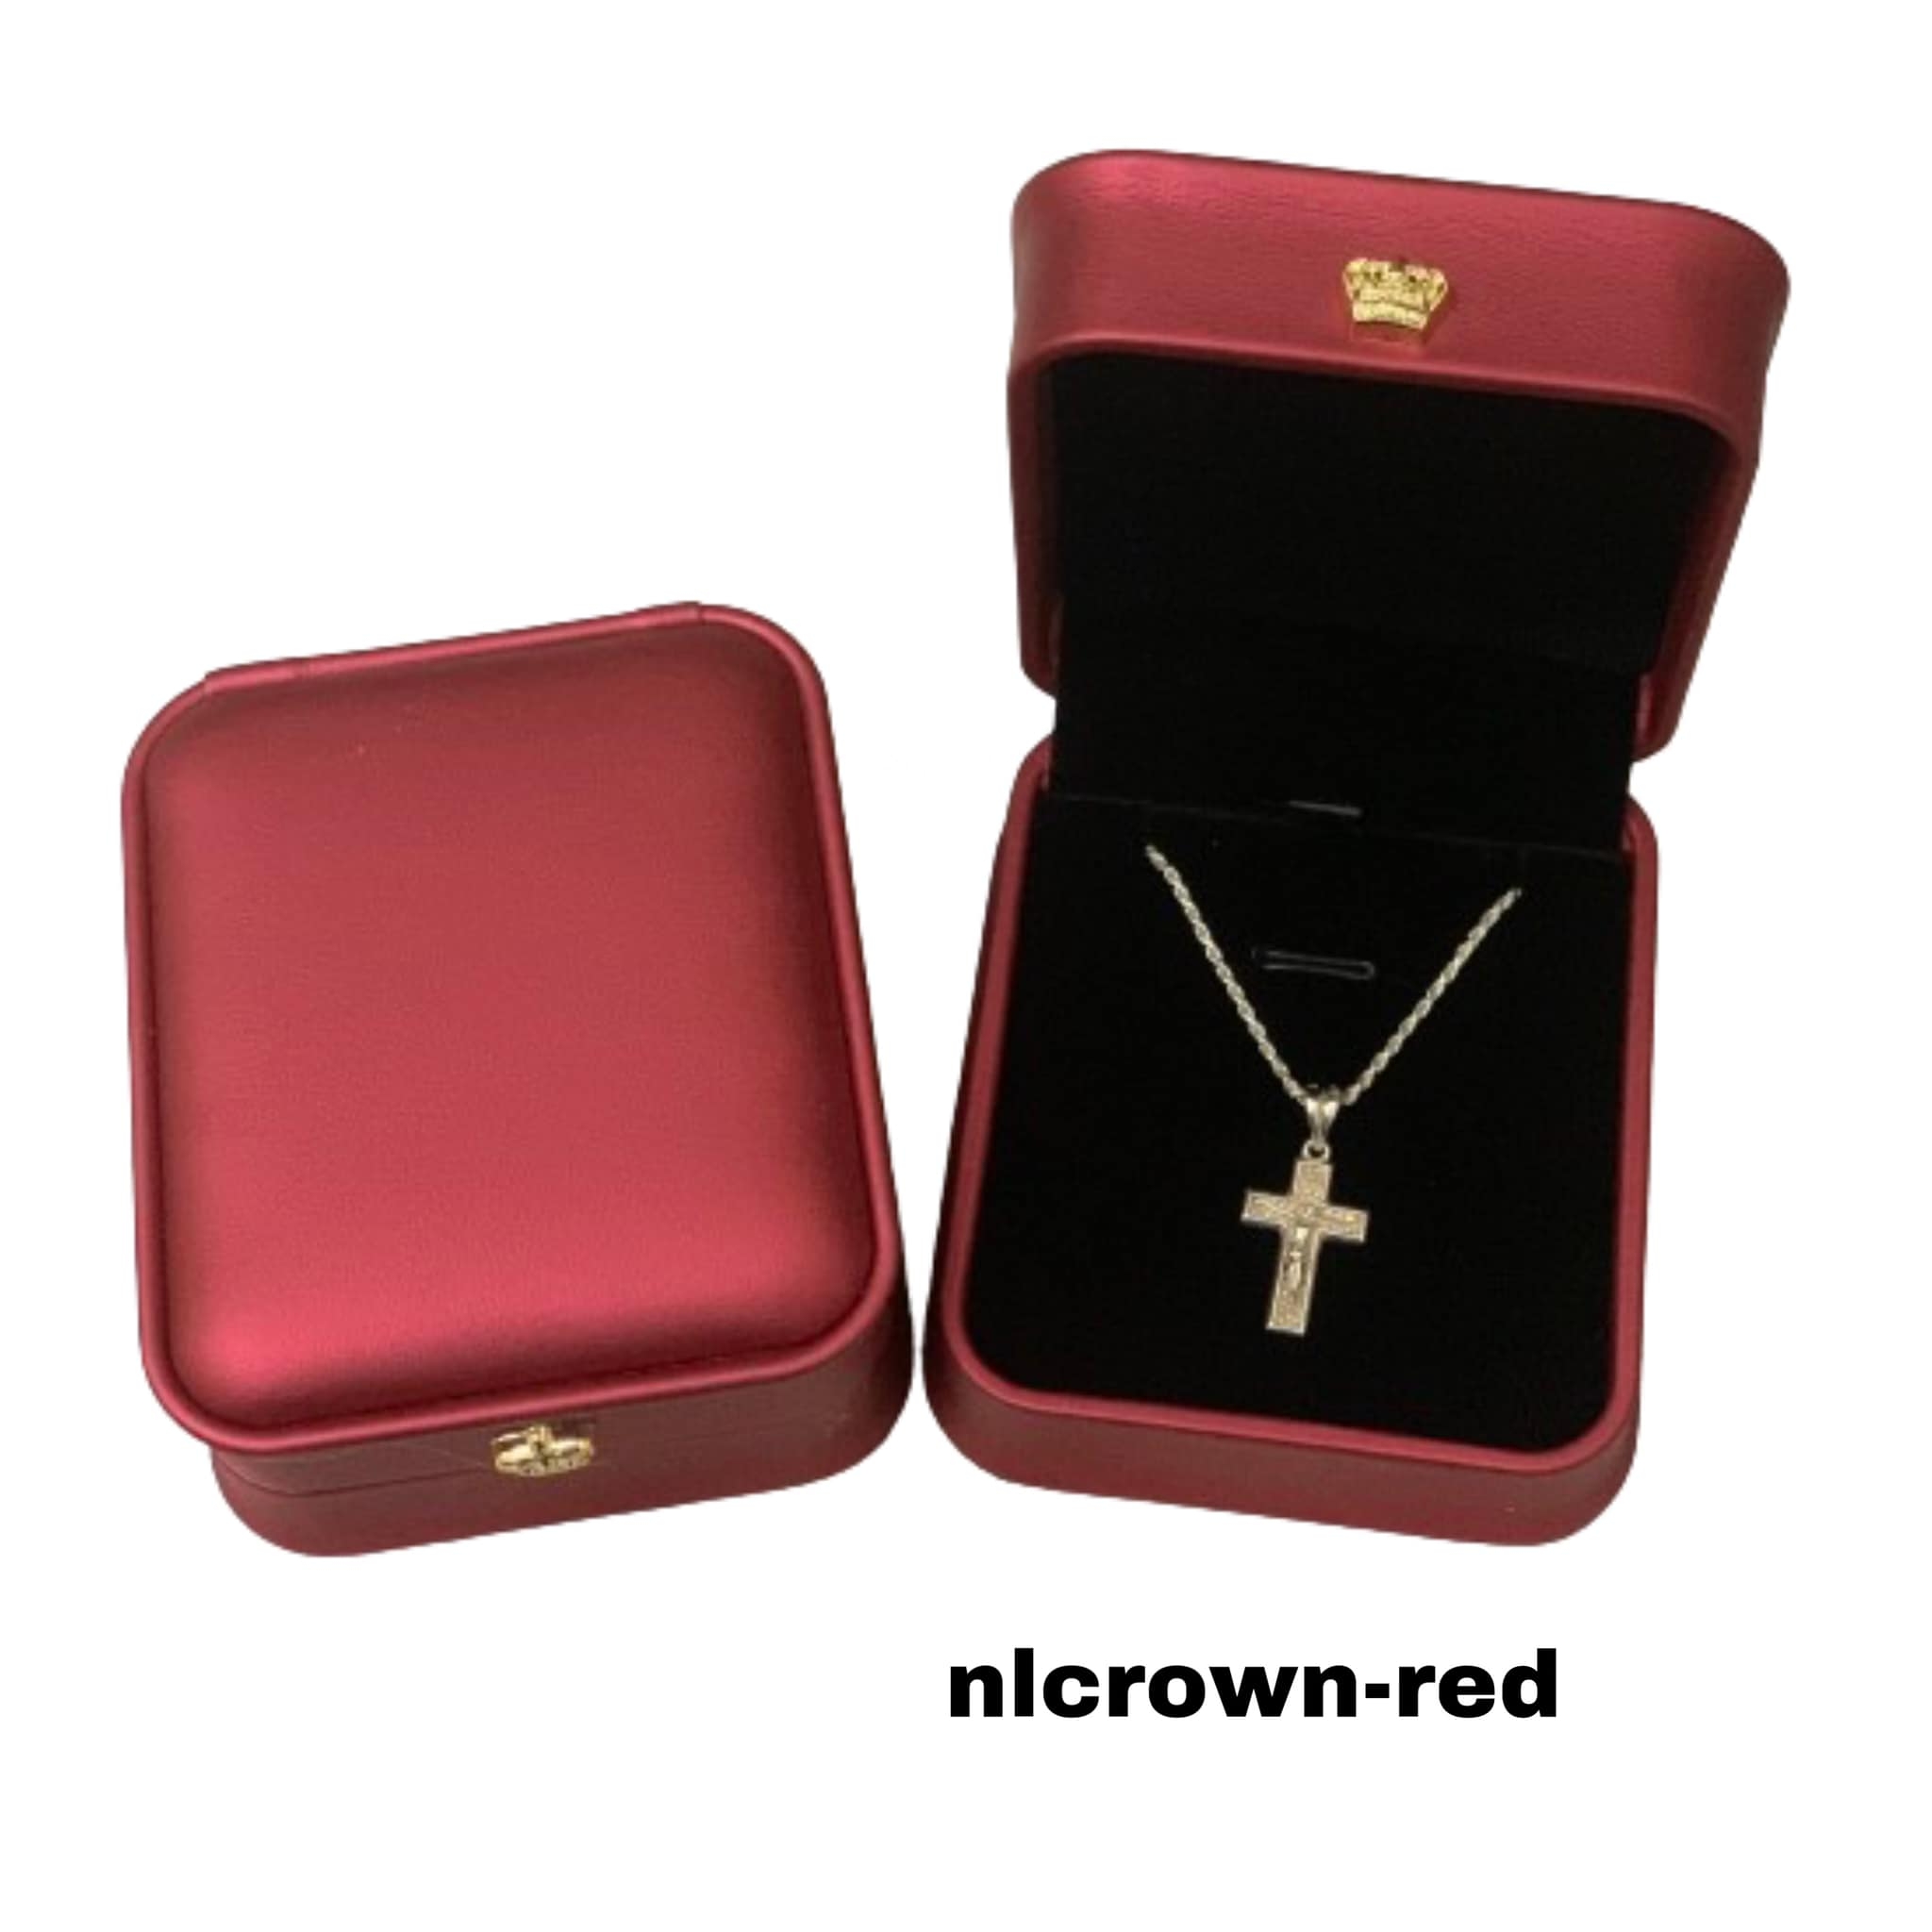 nlcrown-red